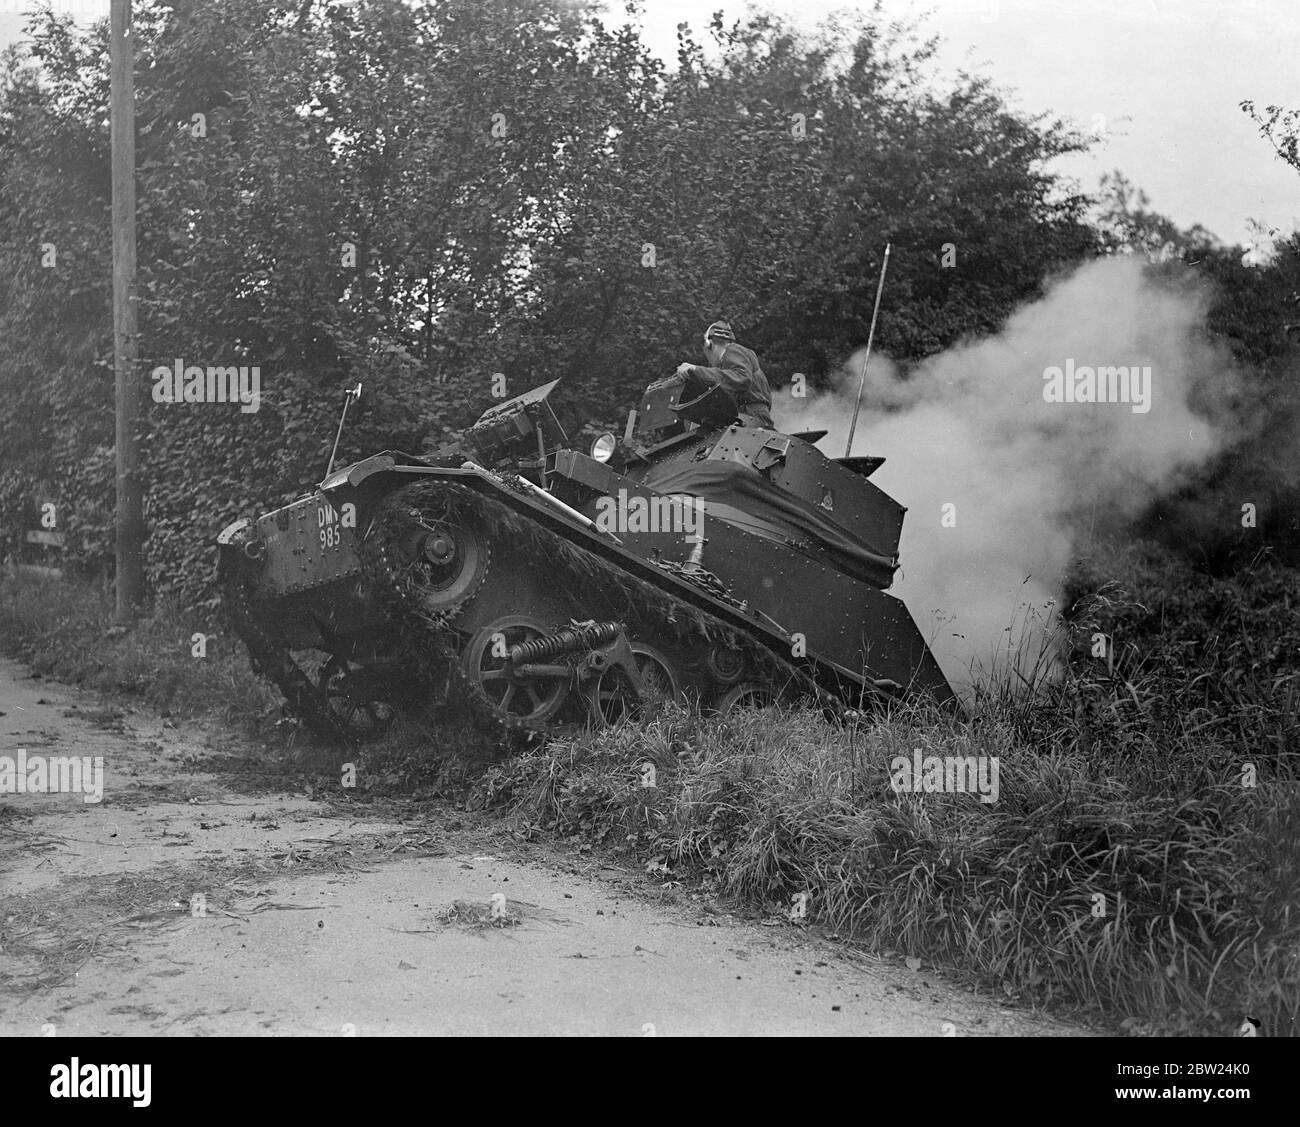 A tank climbs out in the Hampshire 'war'. The Squadron leader tank of the 4th Hussers (Radland) in a Light, Mk VI climbing out of a ditch when coming to grips with Whiteland forces near Stockbridge during the big manoeuvres of the 1st and 2nd Division in Hampshire. 29 August 1938 Stock Photo